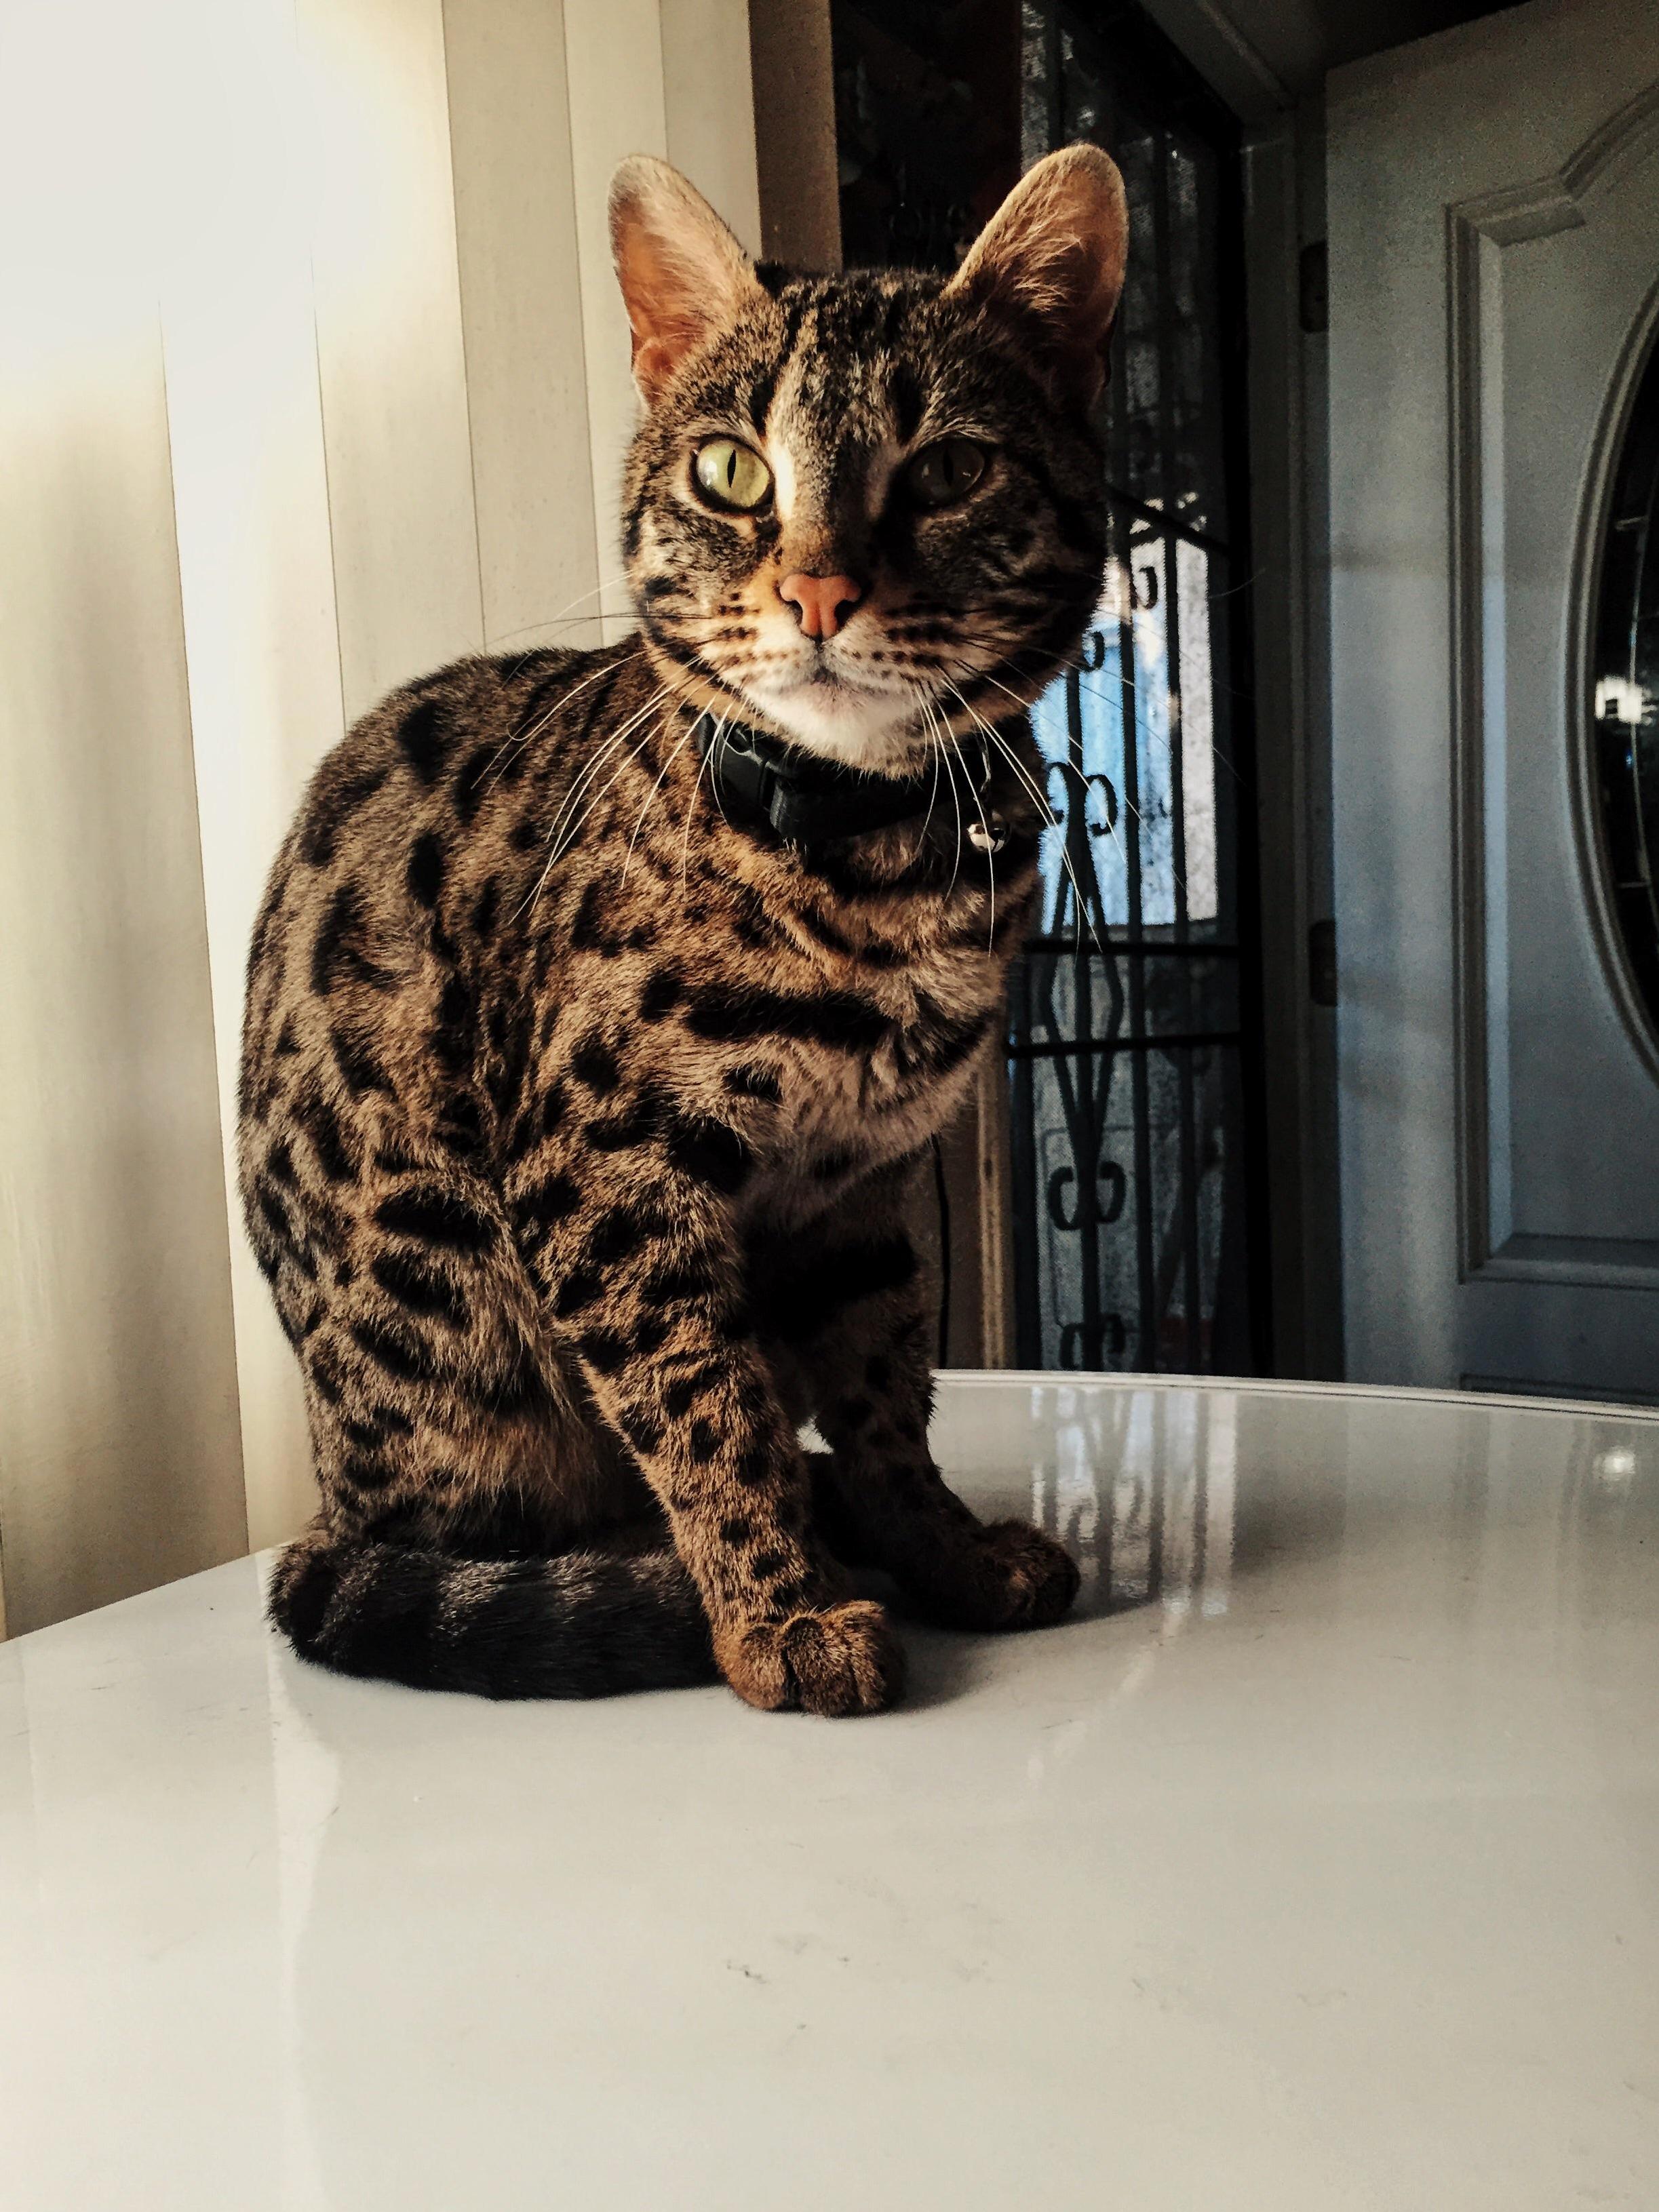 This is pepper my f1 bengal